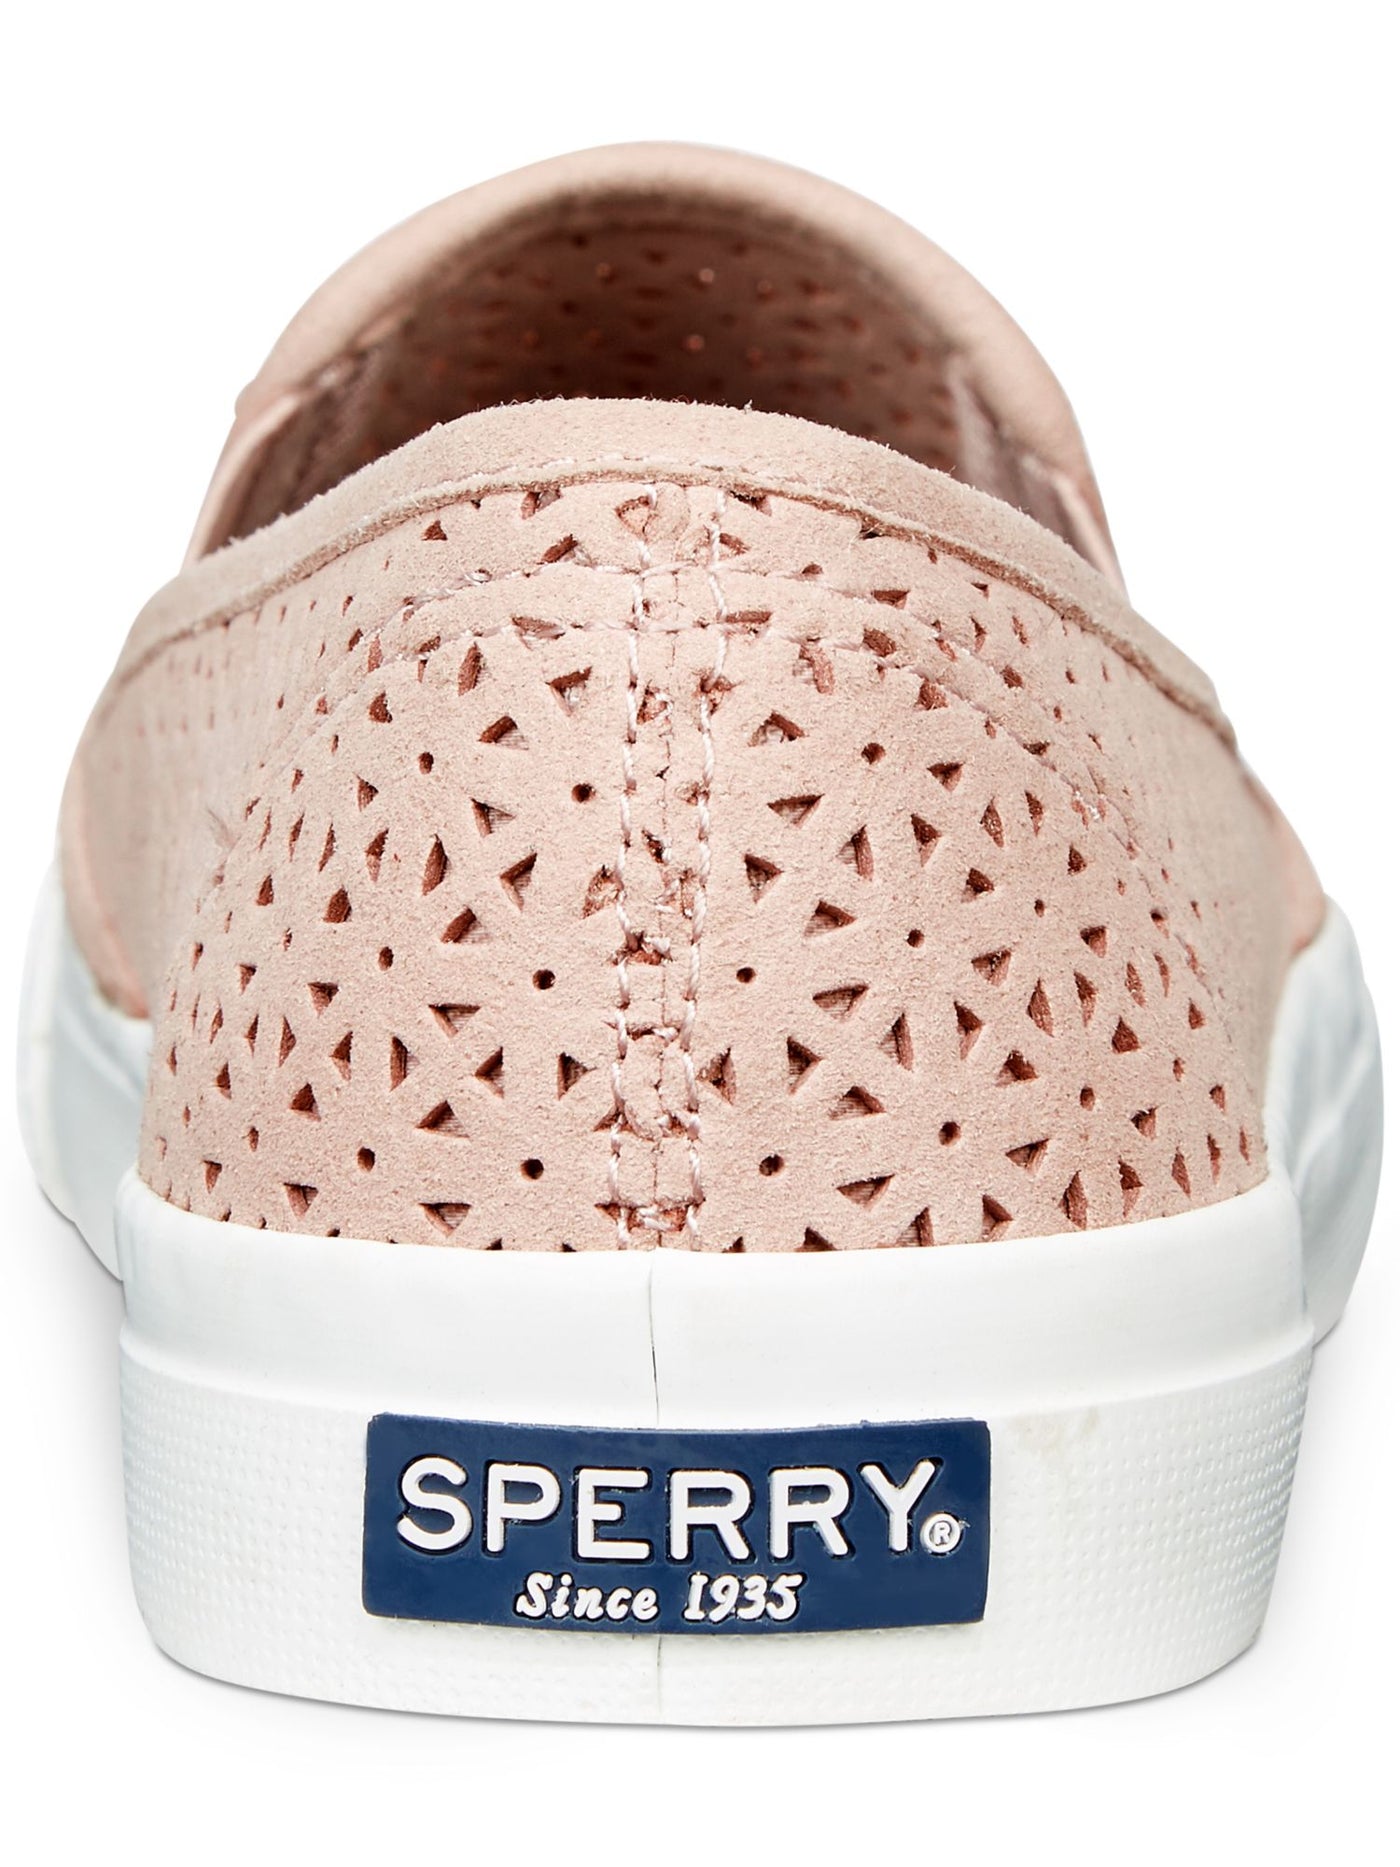 SPERRY Womens Pink Flex Gore Traction Comfort Perforated Arch Support Seaside Round Toe Slip On Athletic Sneakers Shoes 9.5